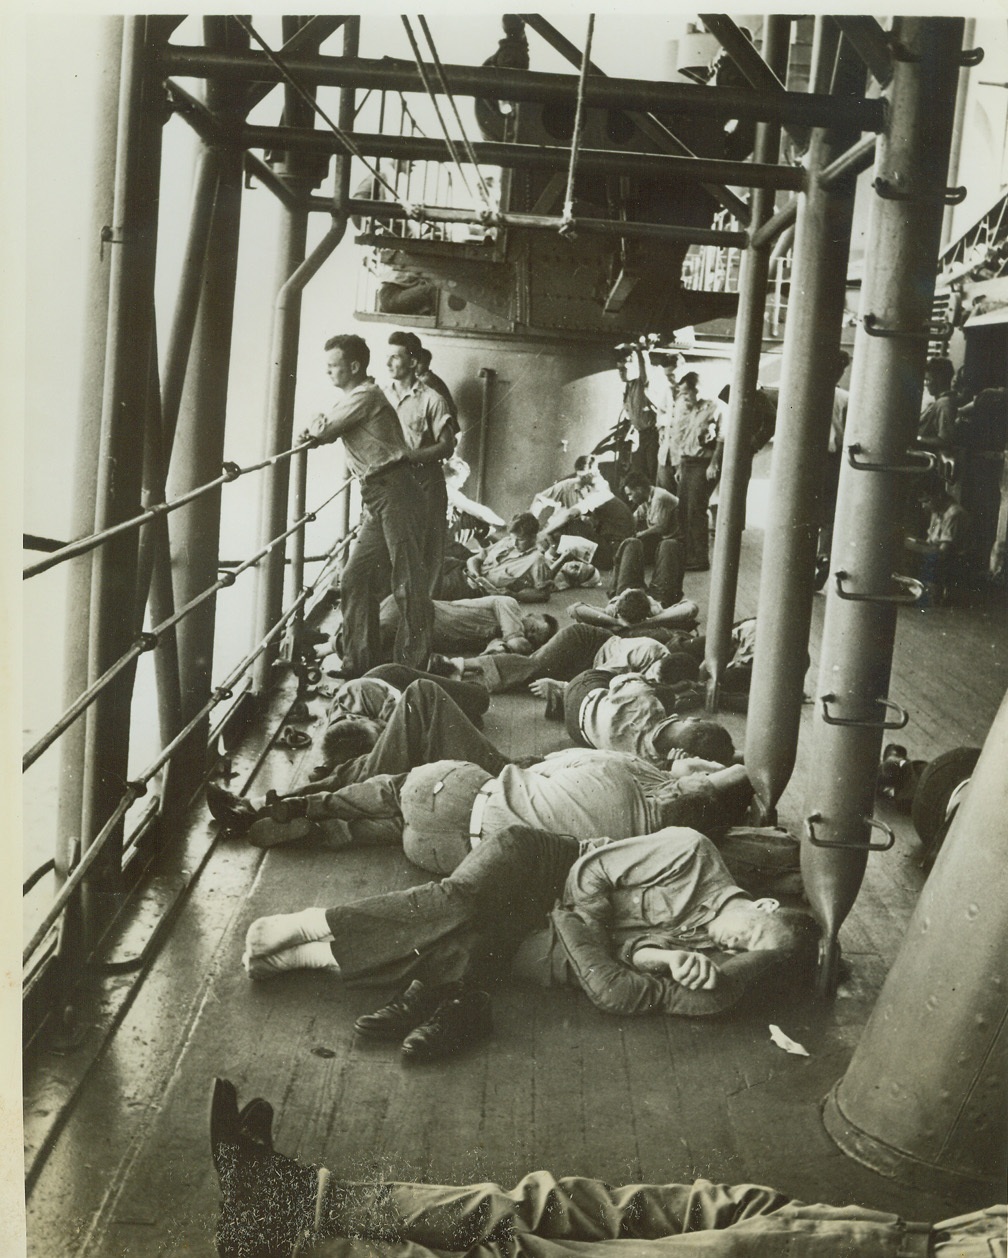 Sailors Sleep After Day of Battle, 2/18/1942. SOMEWHERE IN THE PACIFIC -- Sailors as they slept with heads pillowed on life jackets, on the deck of a unit of the U.S. Fleet, the day after the United States Navy had attacked the mandated Gilbert and Marshall Islands. Note another group of sailors standing watch as vessel traveled through sub-infested waters.   Credit: (ACME);